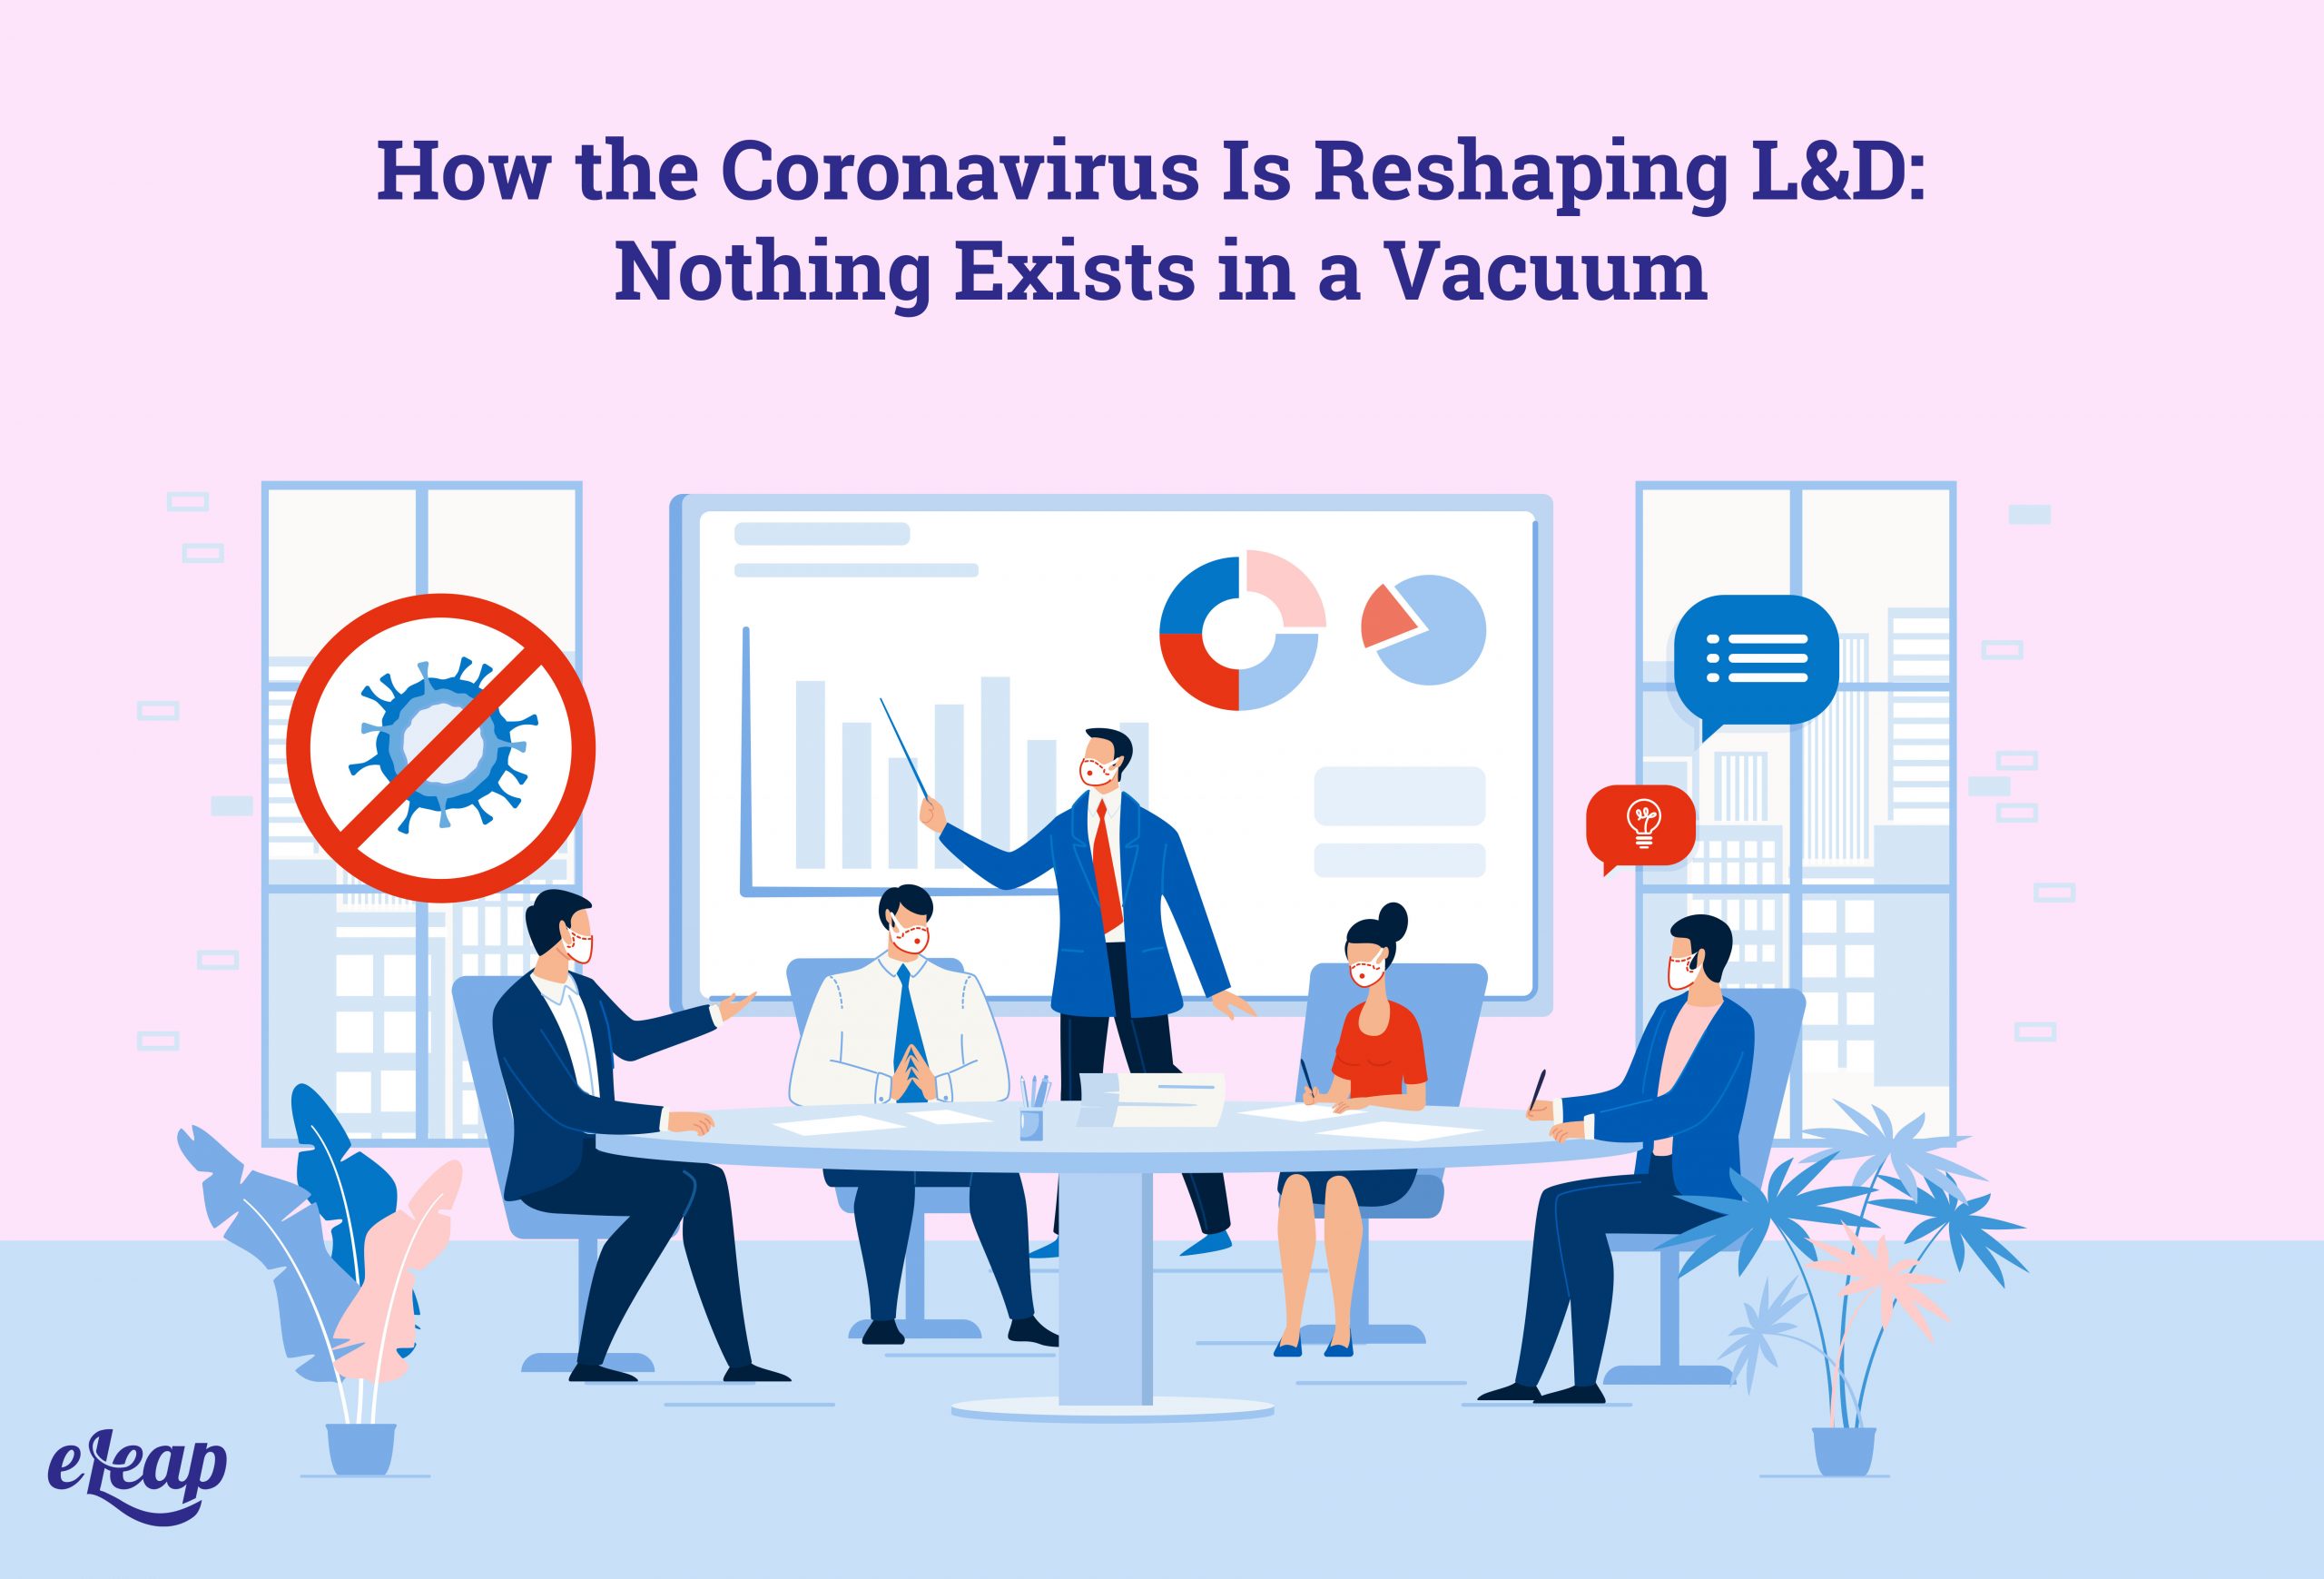 How the Coronavirus Is Reshaping L&D: Nothing Exists in a Vacuum